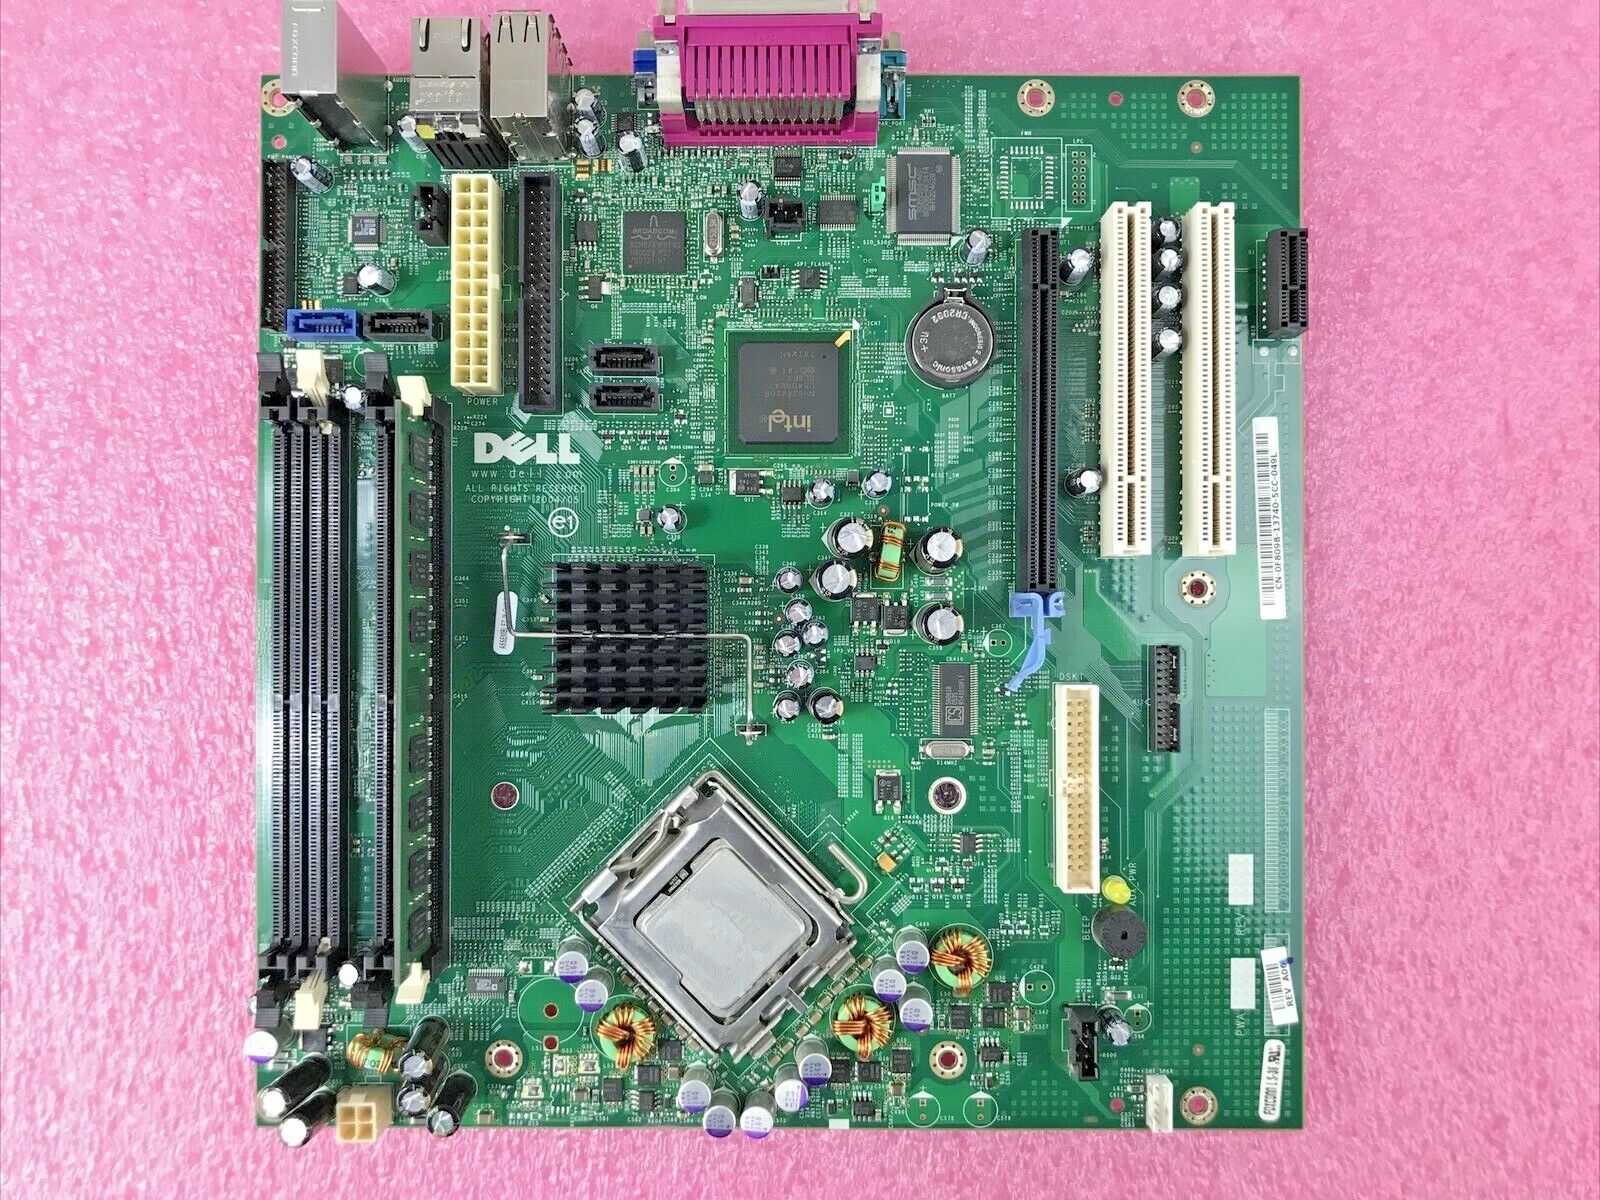 Dell OF8098 Motherboard Intel Pentium D 3.00GHz with 2GB